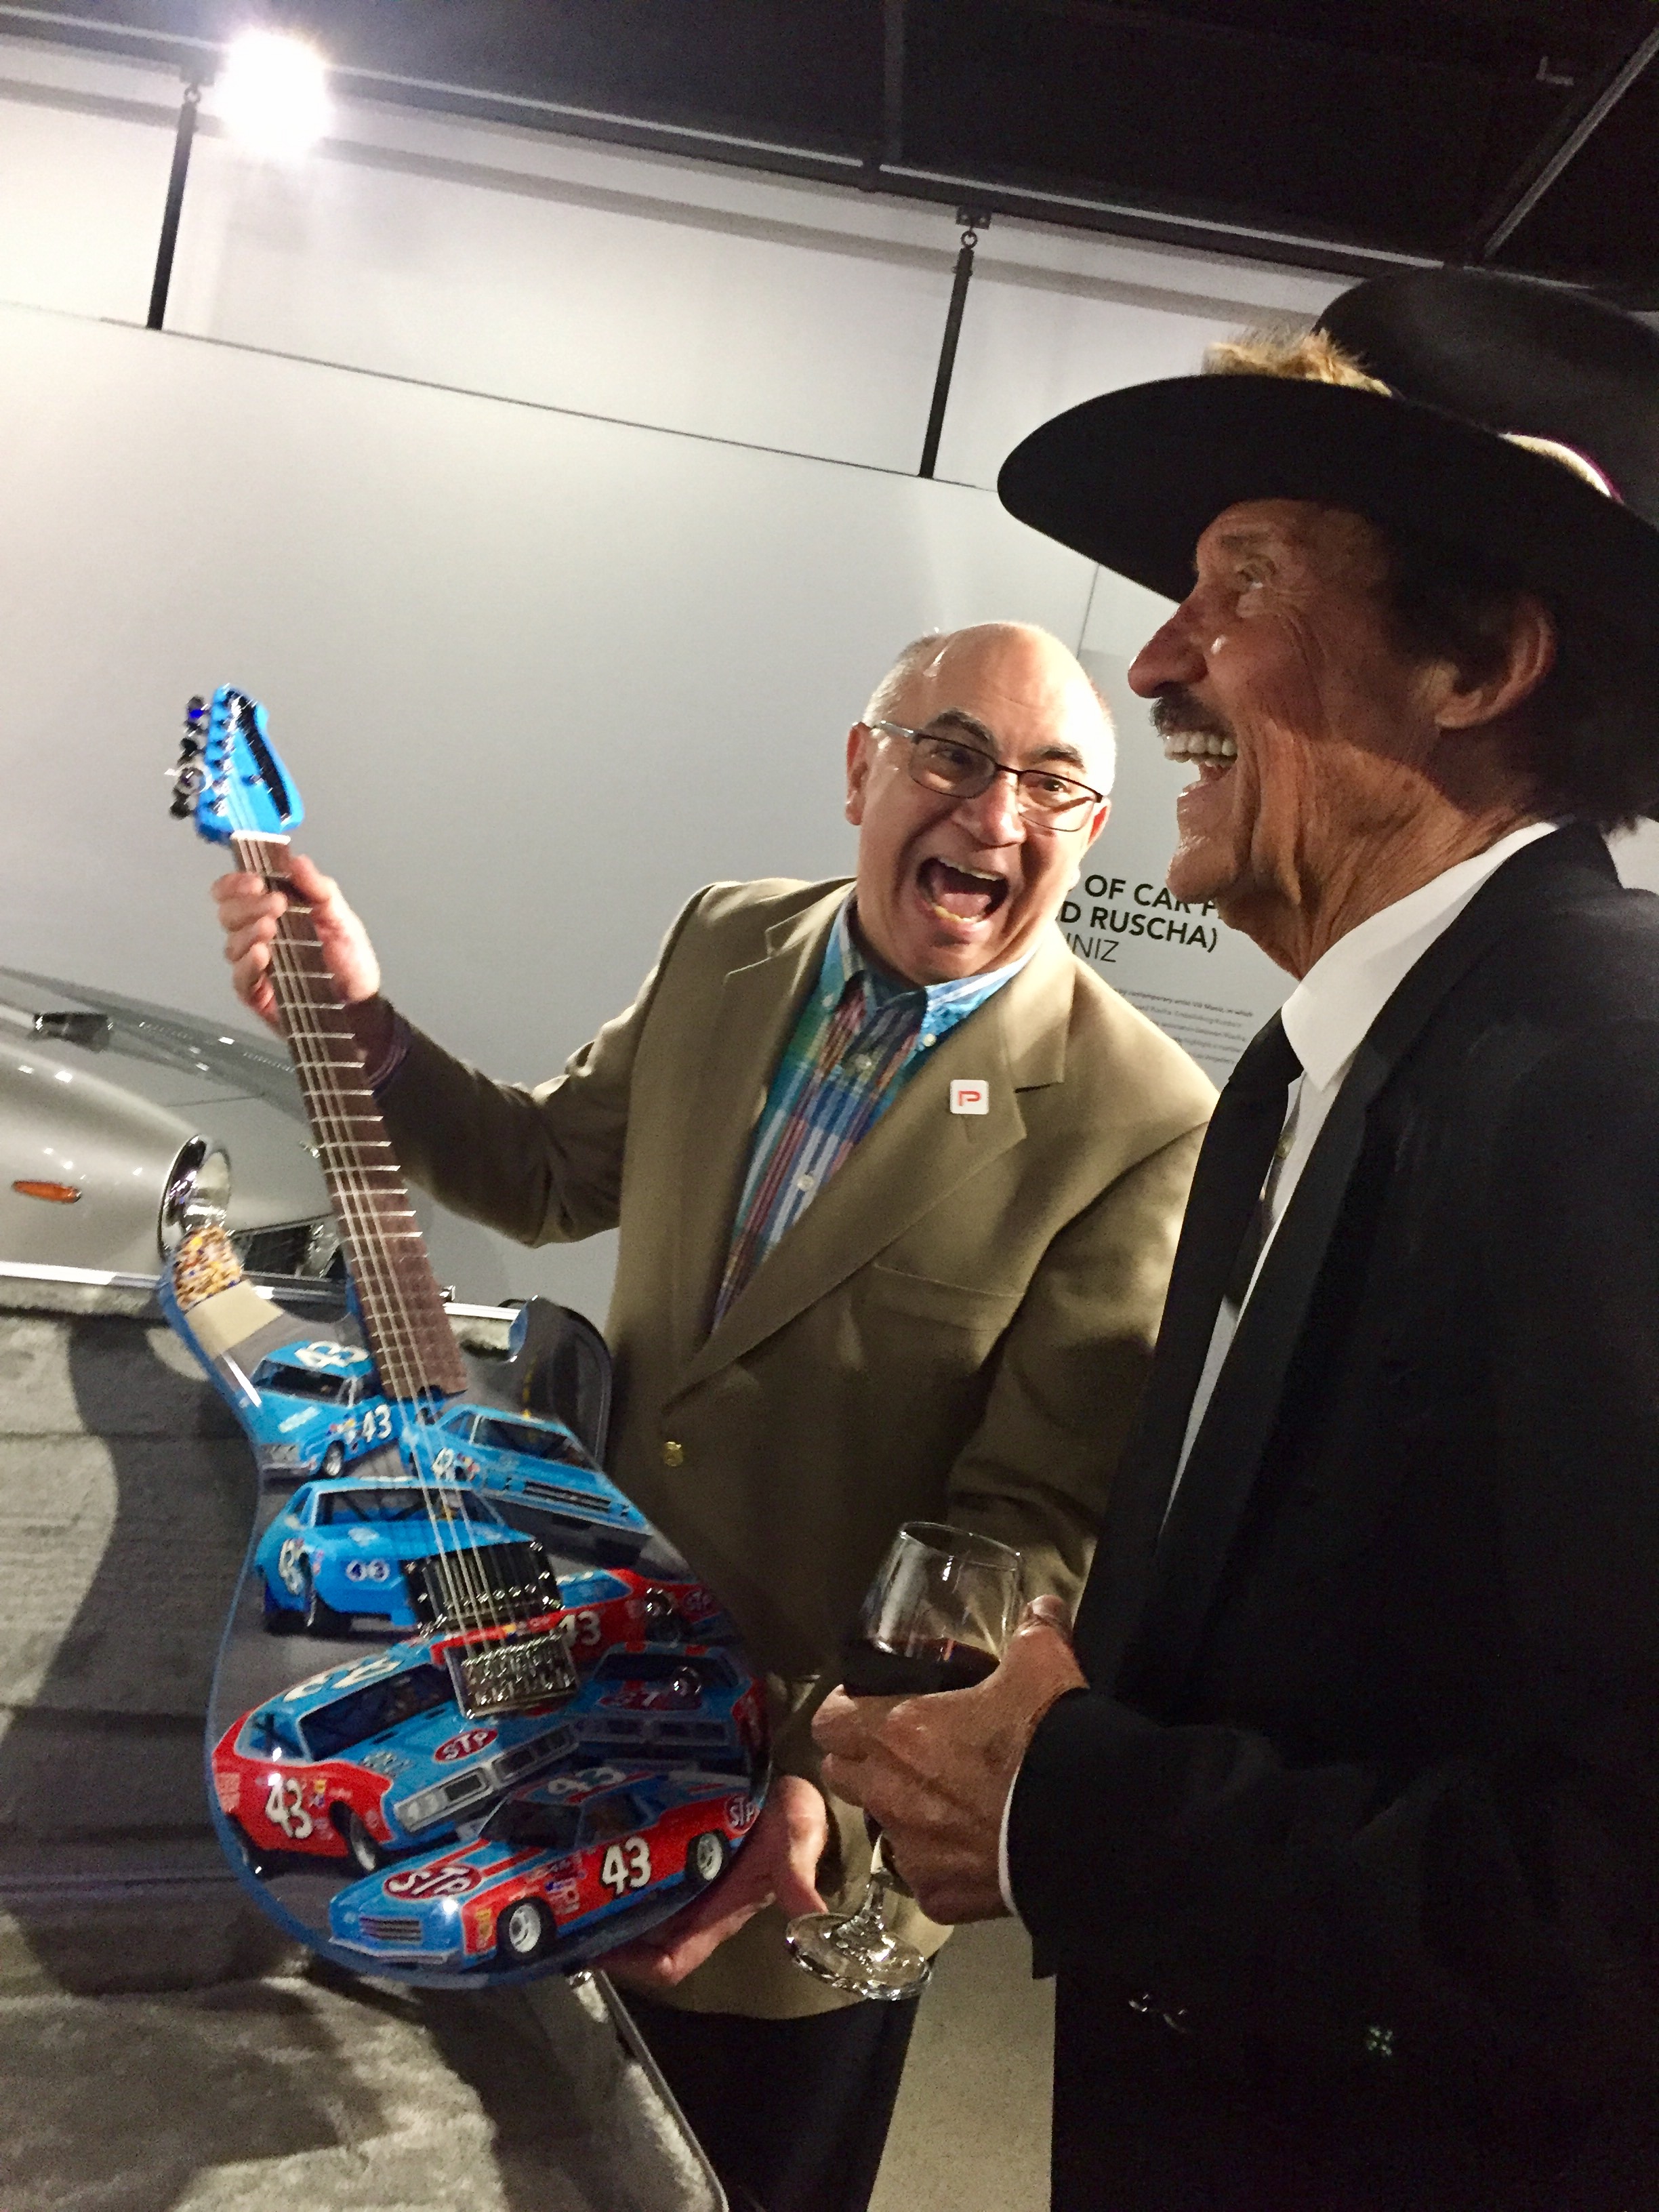 Dave with Richard Petty